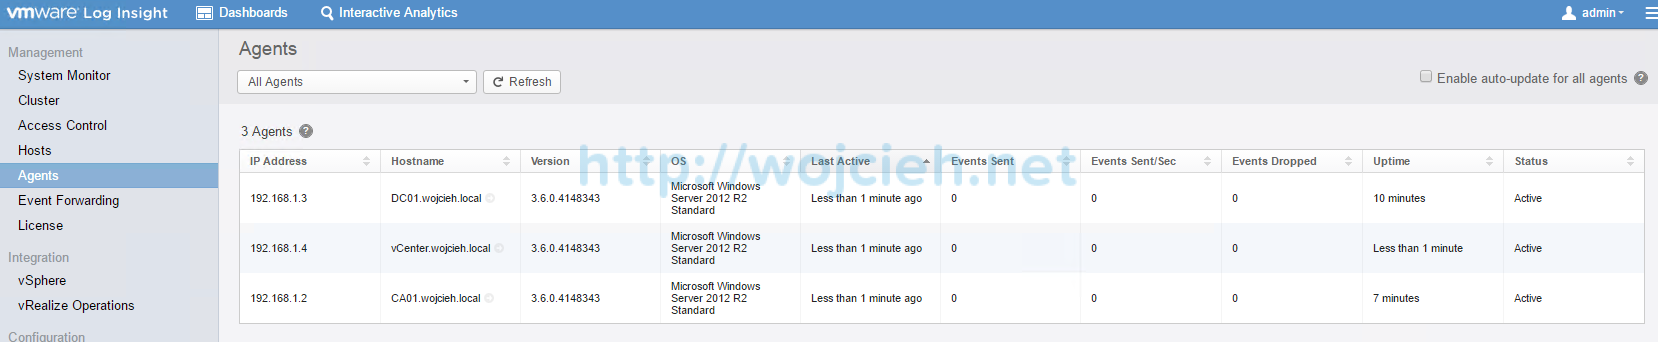 VMware vRealize Log Insight - Installation and Configuration - 26